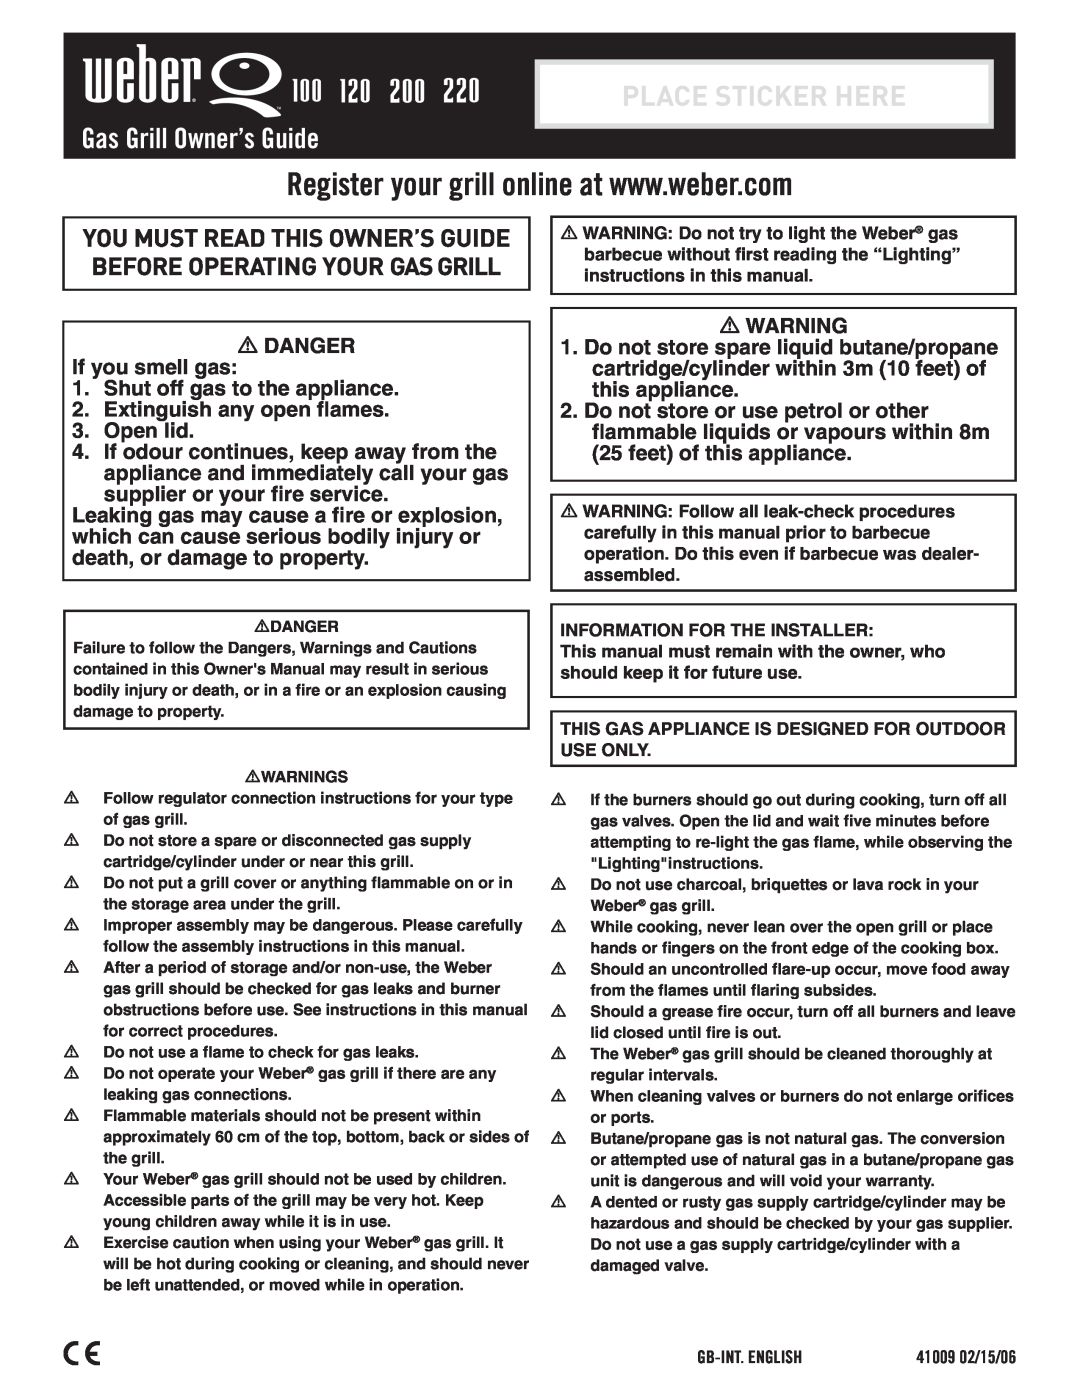 Weber LP GAS GRILL, 100, 220, 200 instruction manual #59779, LP Gas Grill Owner’s Guide Assembly - Pg, Place Sticker Here 